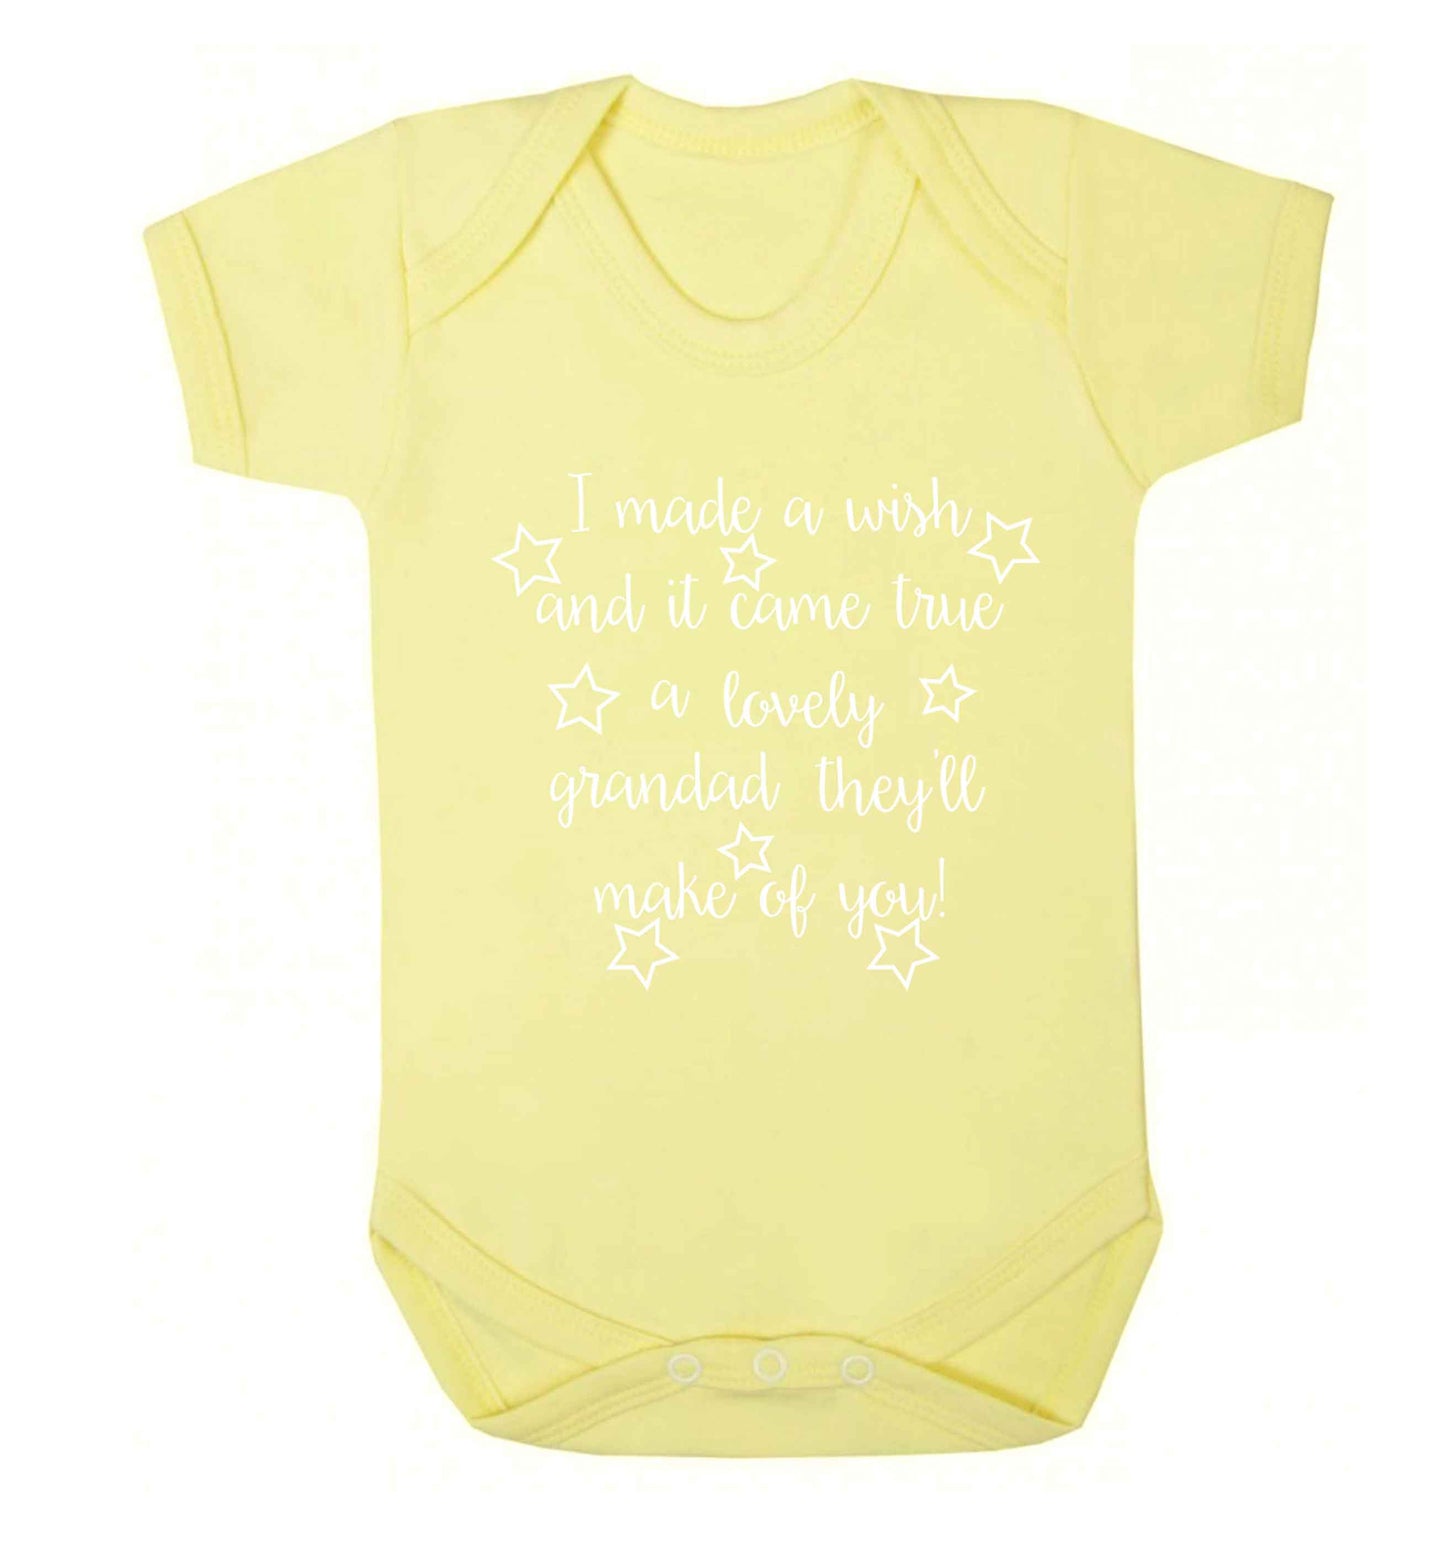 I made a wish and it came true a lovely grandad they'll make of you! Baby Vest pale yellow 18-24 months